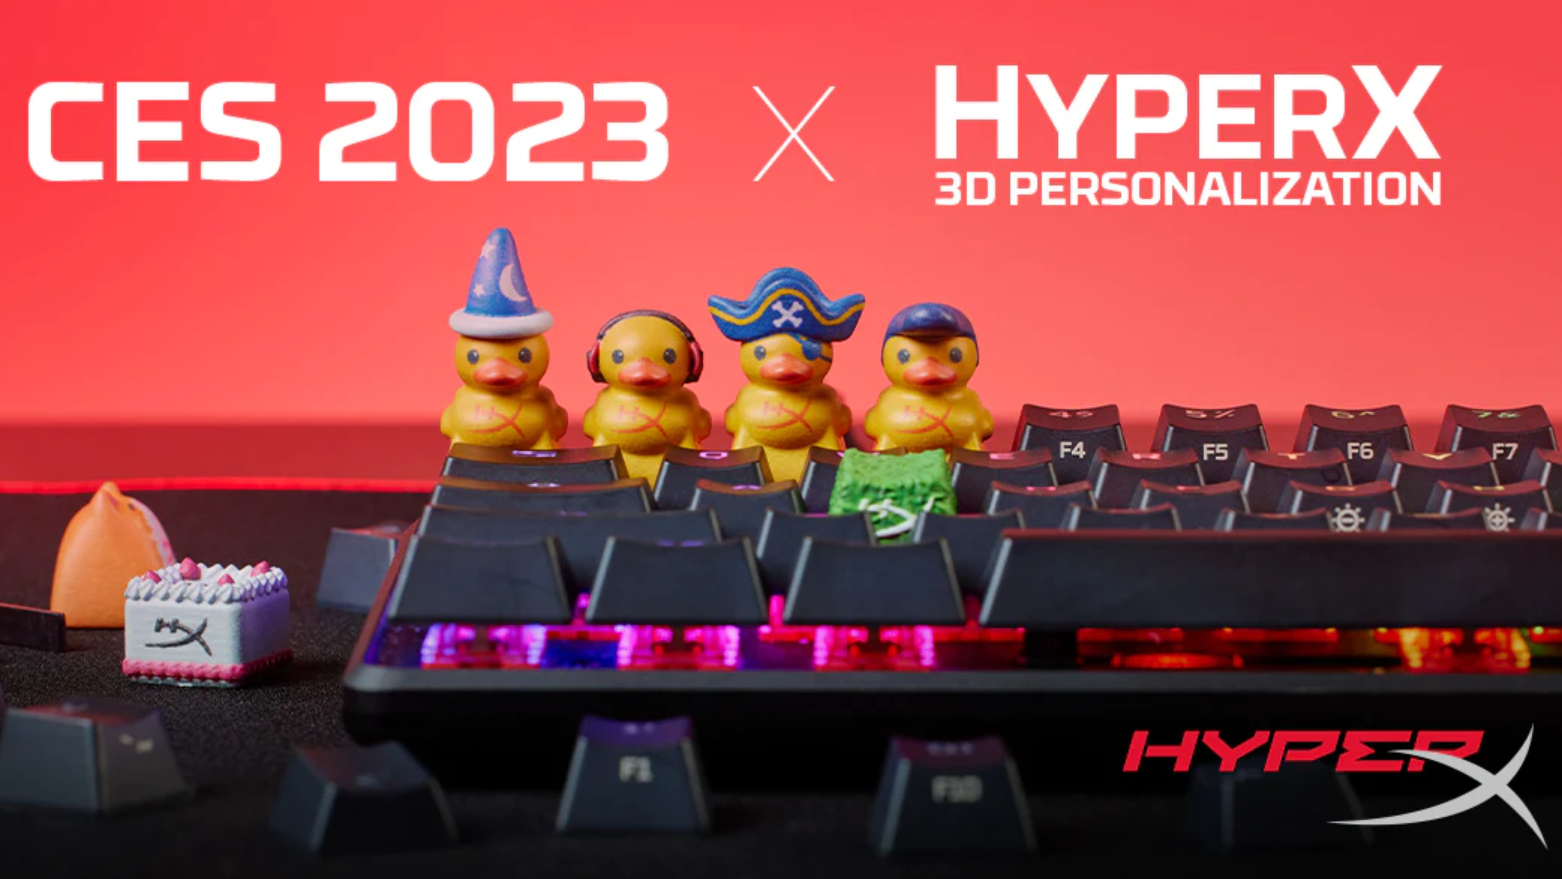 A promo shot for HyperX's HX3D service, with several 3D-printed duck keycaps atop a keyboard.